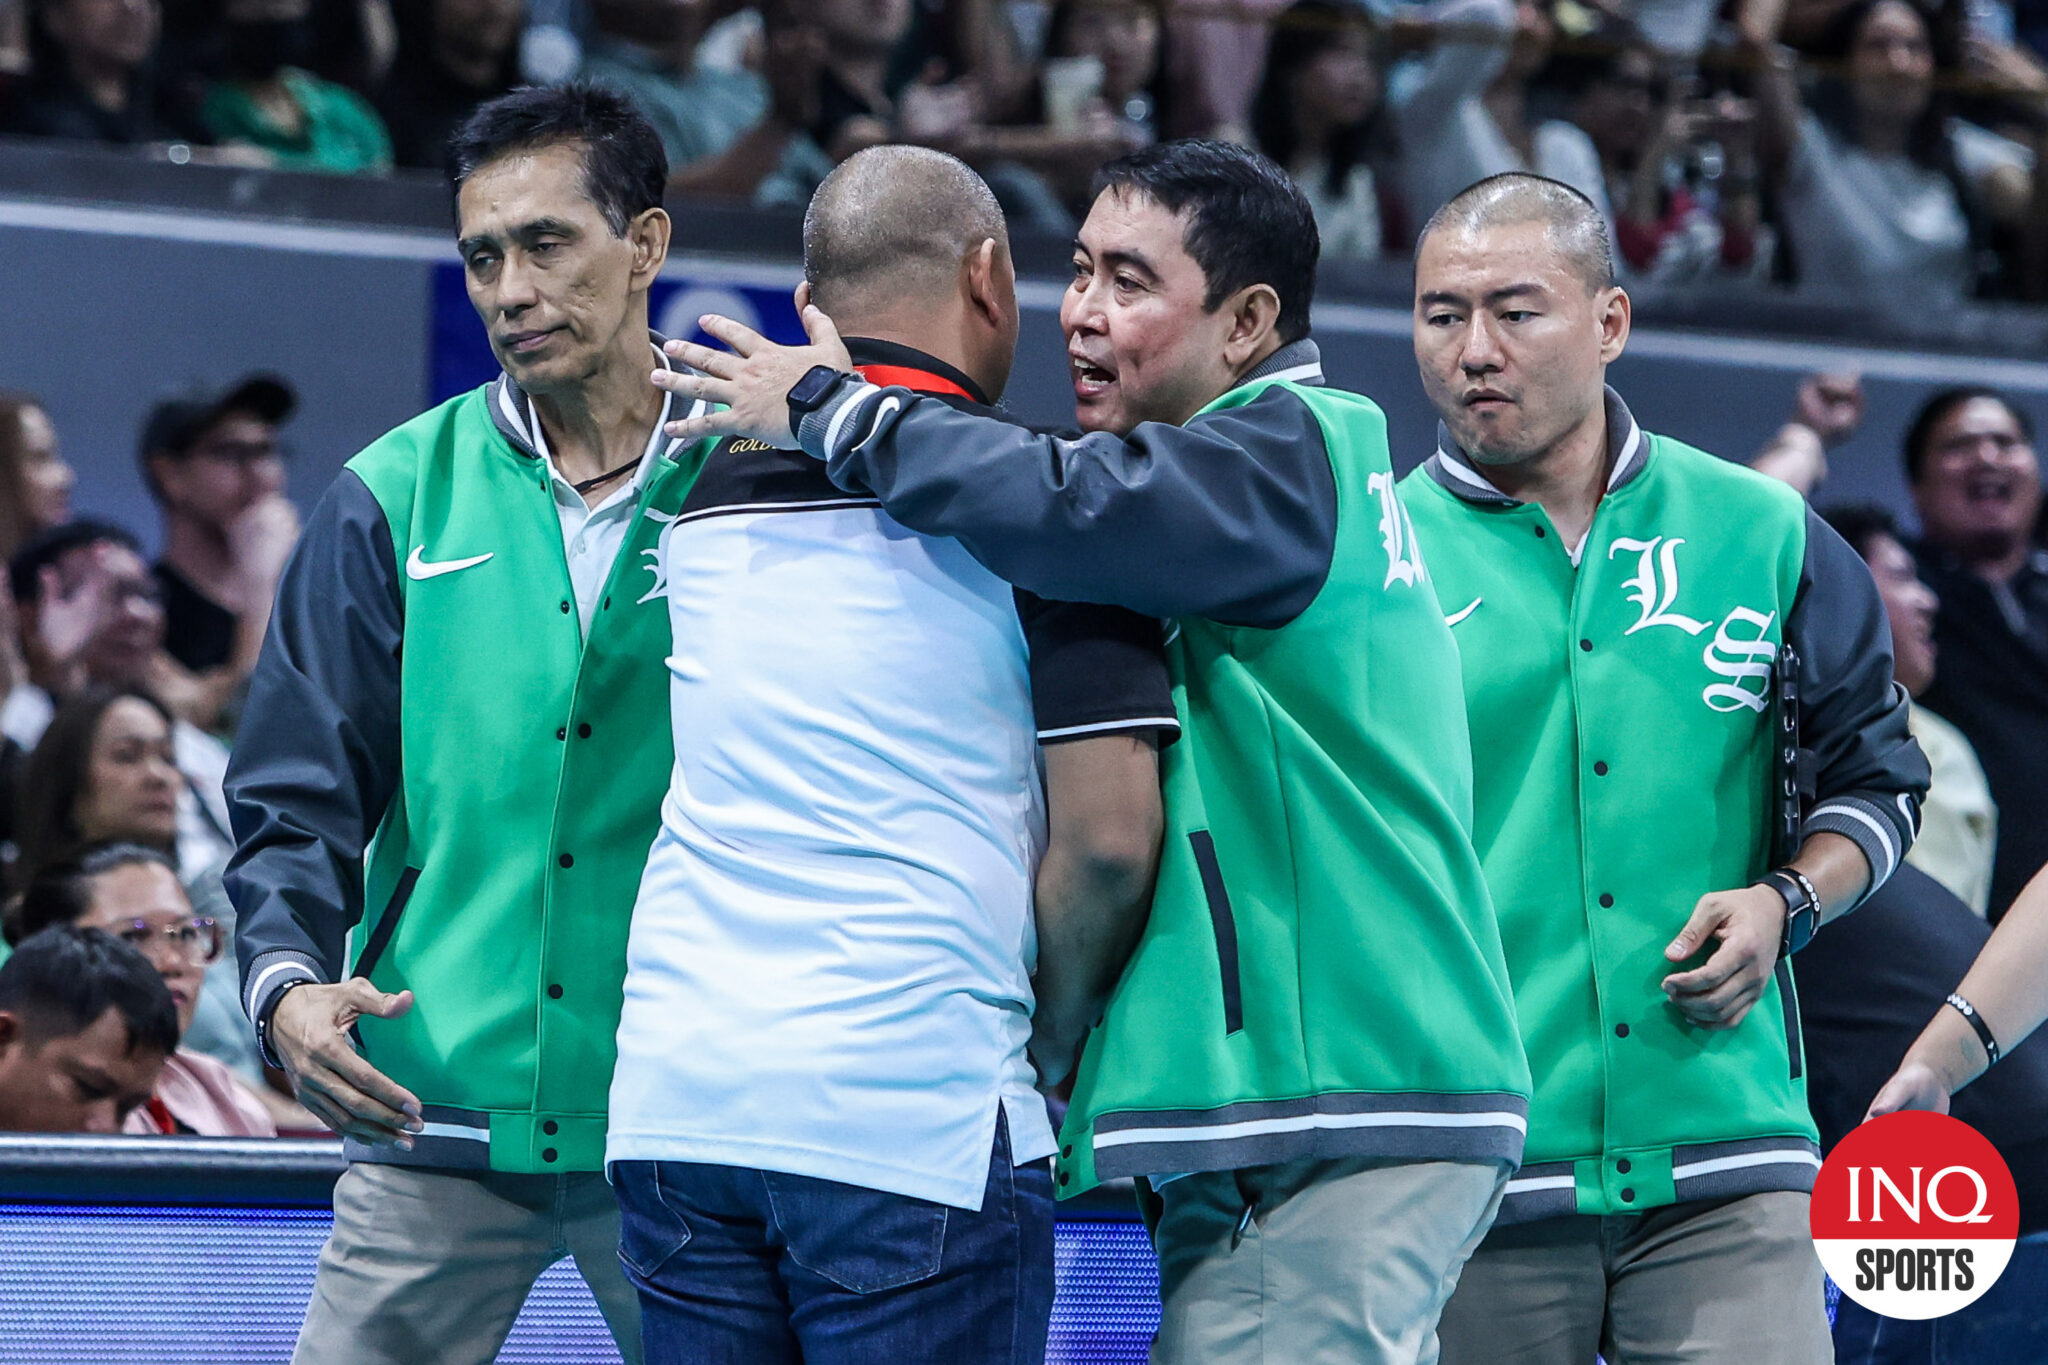 UST coach says Ramil De Jesus gesture ‘like blessing to win UAAP title’